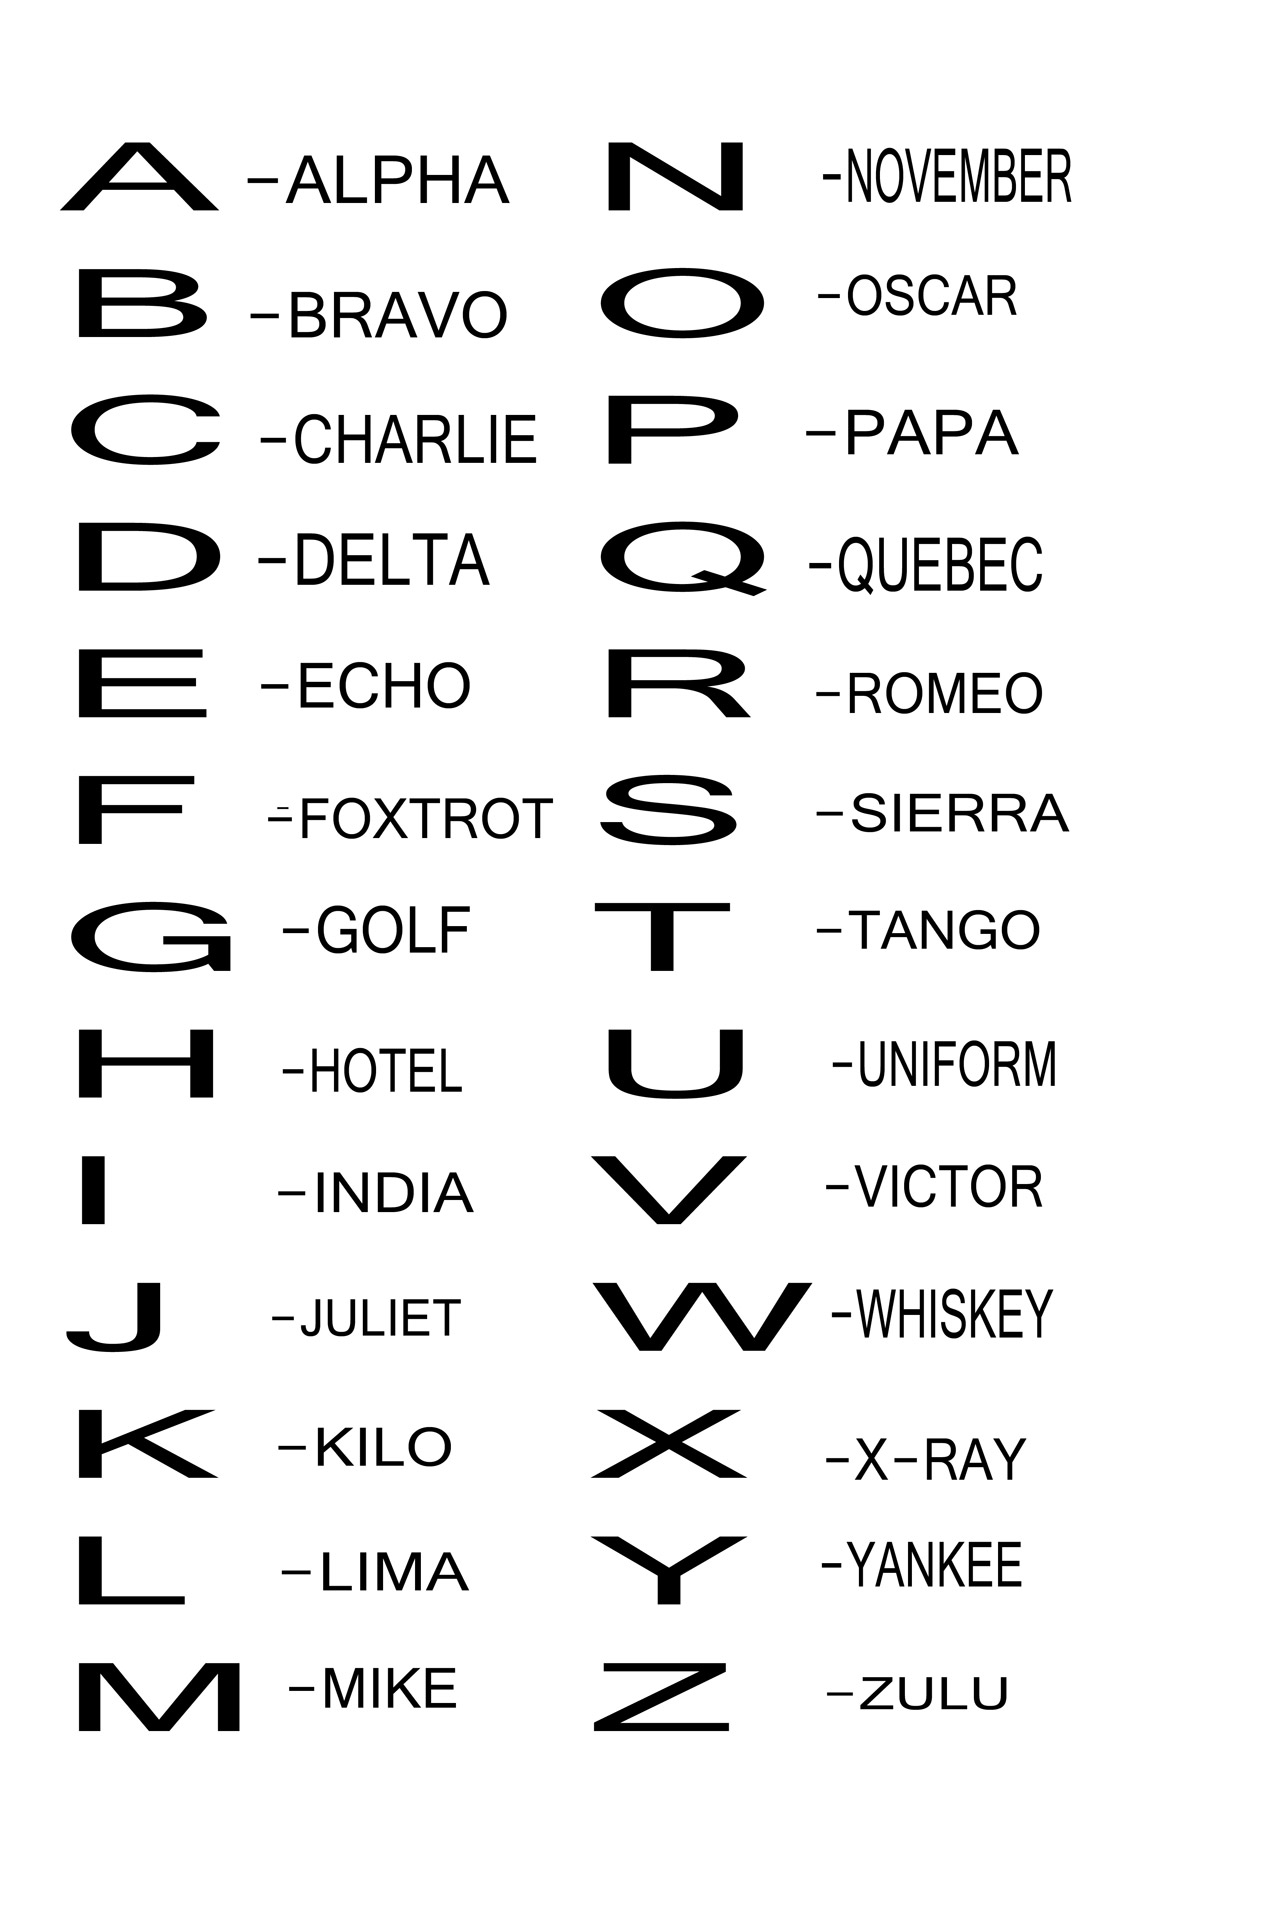 English Phonetic Alphabet English Phonetic Alphabets : Vowels With Pronunciation.